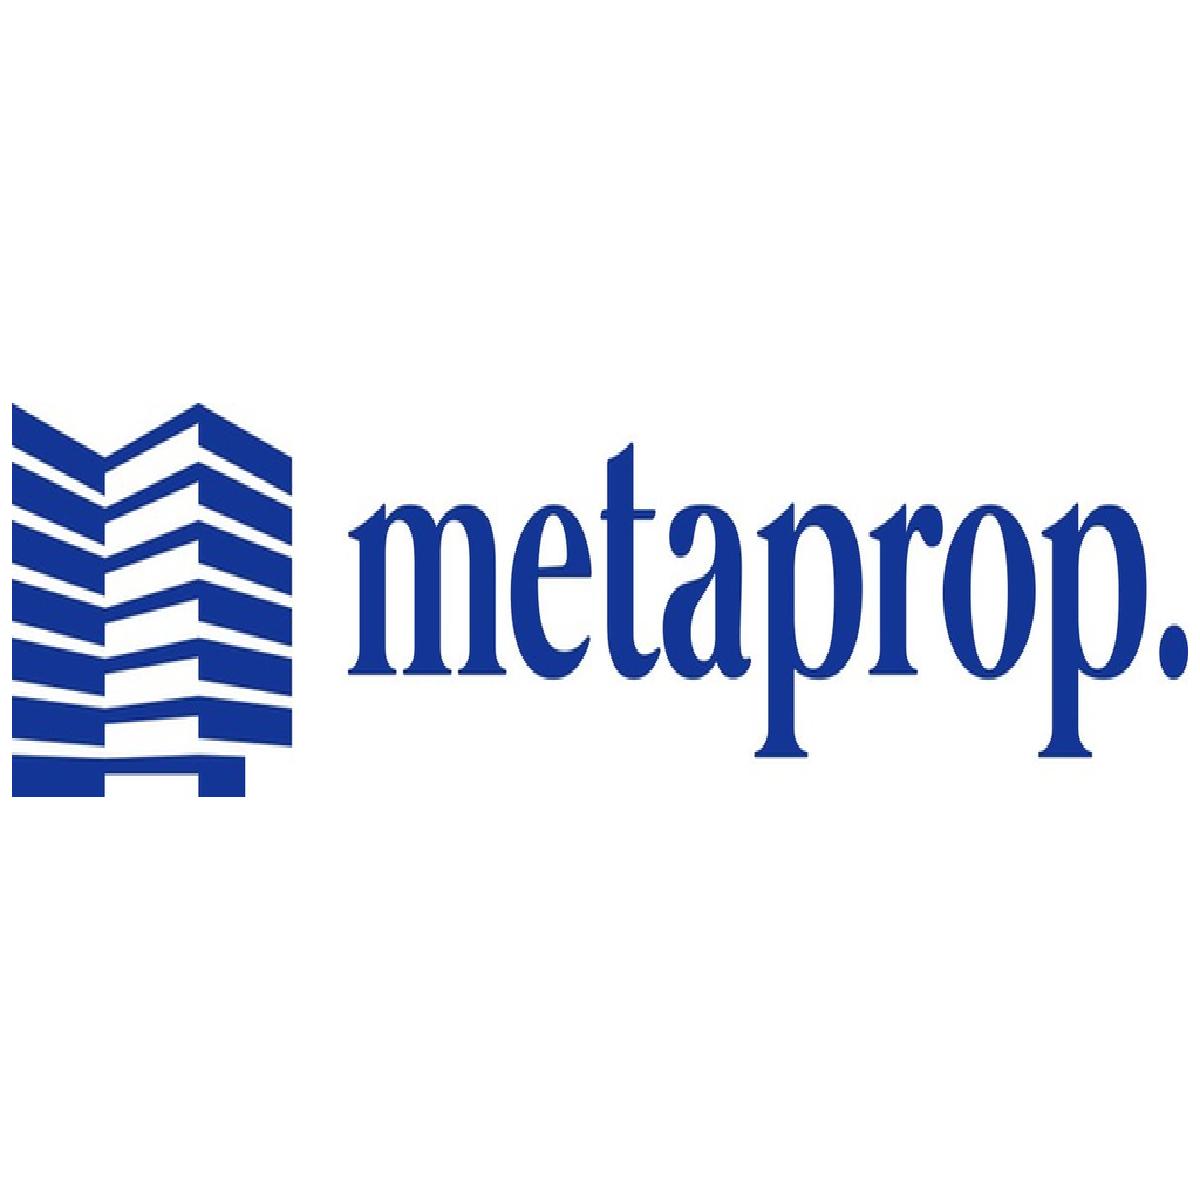 MetaProp Expands in APAC Region with Appointment of Industry Leader Satoshi Murakami as Director